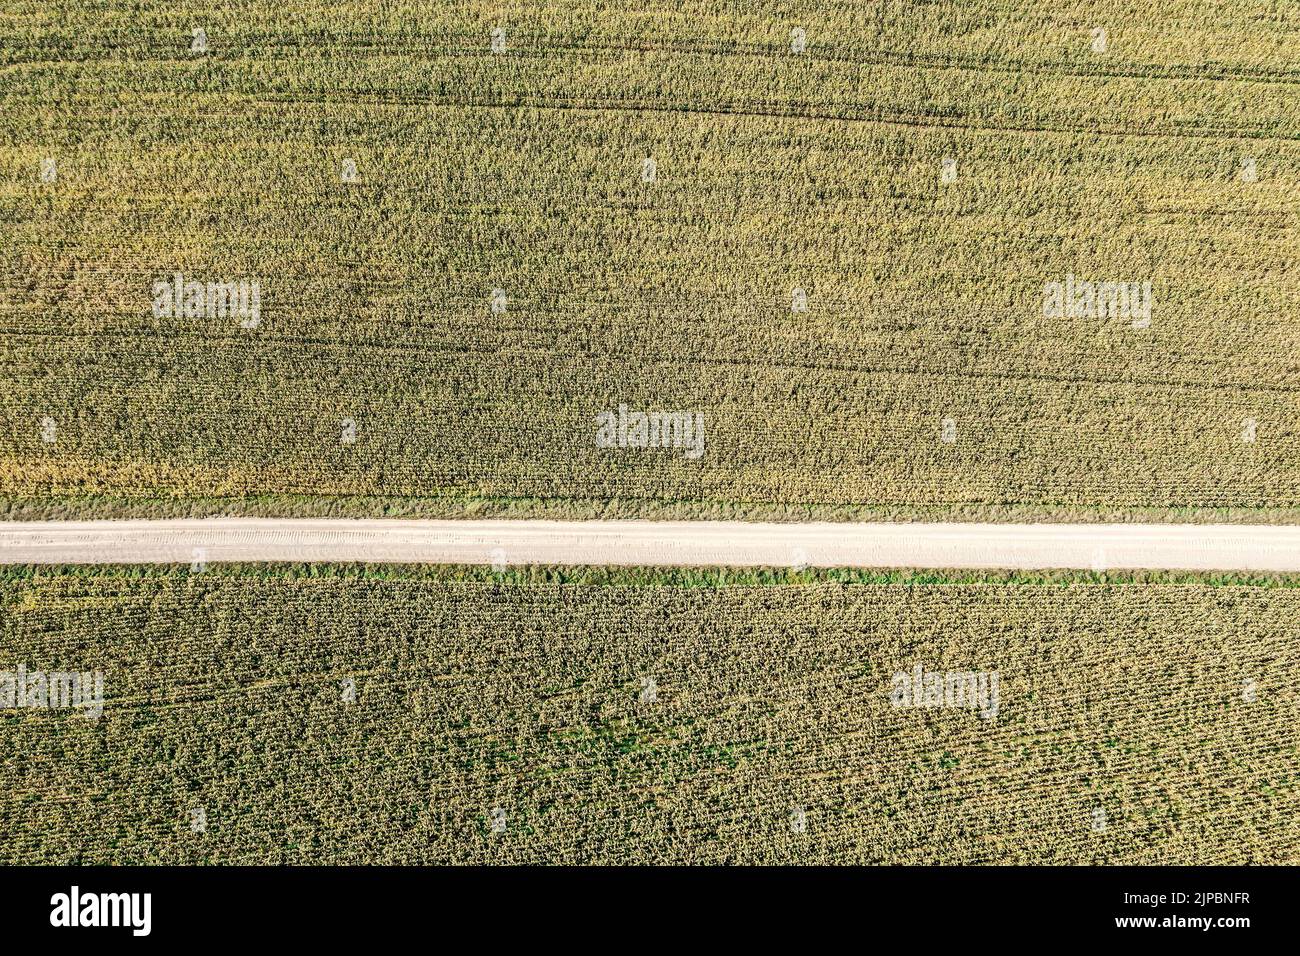 aerial top view of straight rural dirt road among wheat fields on bright sunny day. Stock Photo